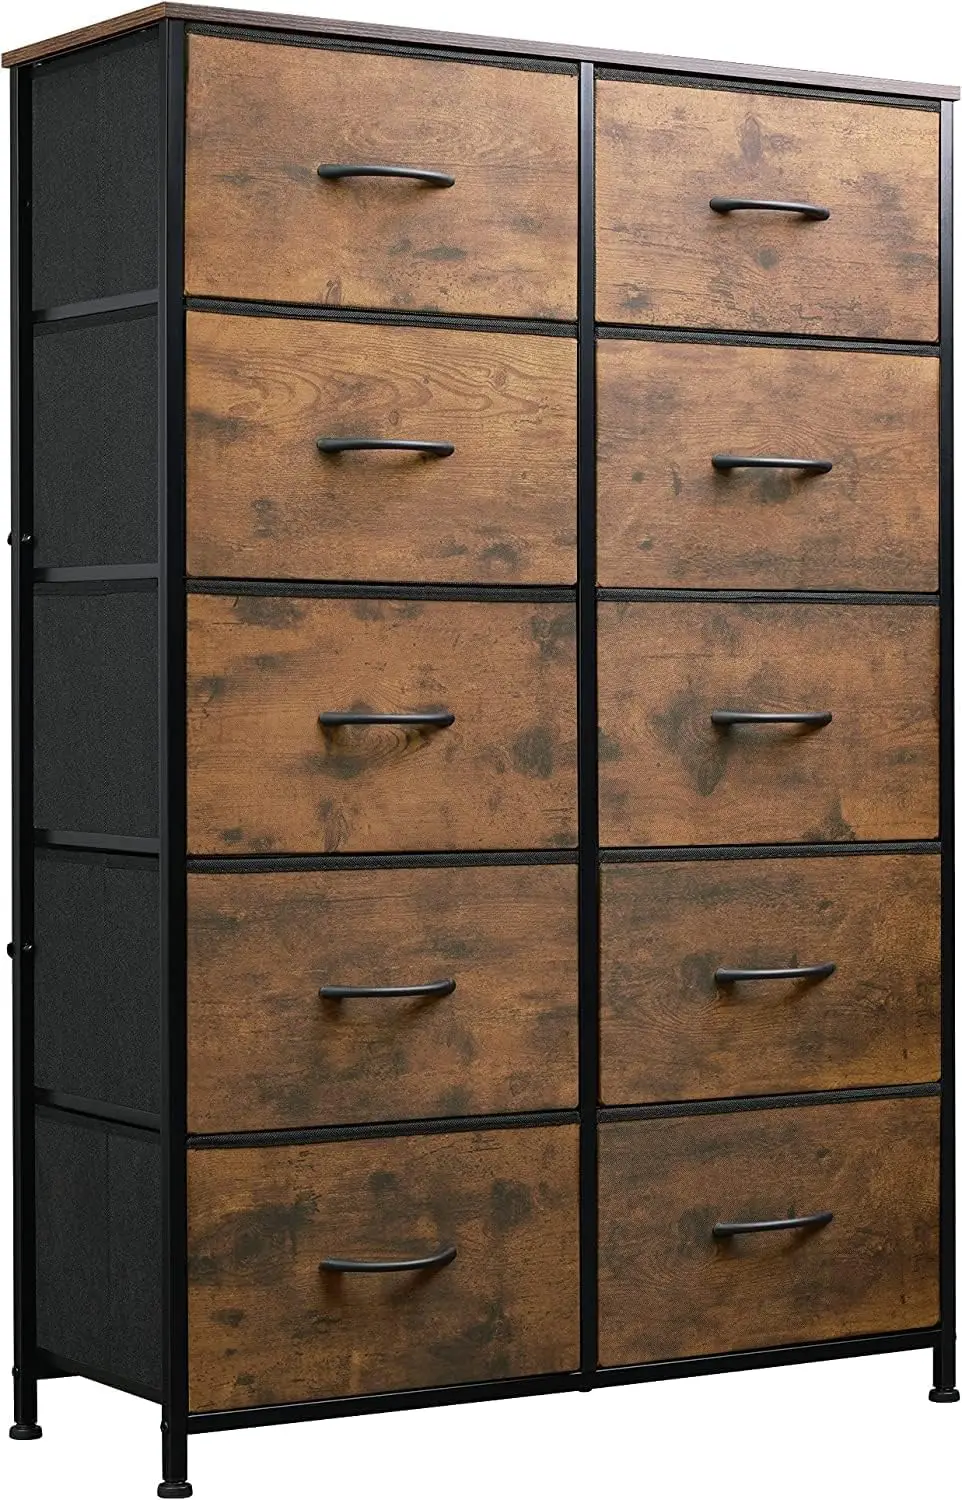 

Tall Dresser for Bedroom with 10 Drawers, Chest of Drawers, Fabric Dresser for Closets, Storage Organizer Unit with Fabric Bins,